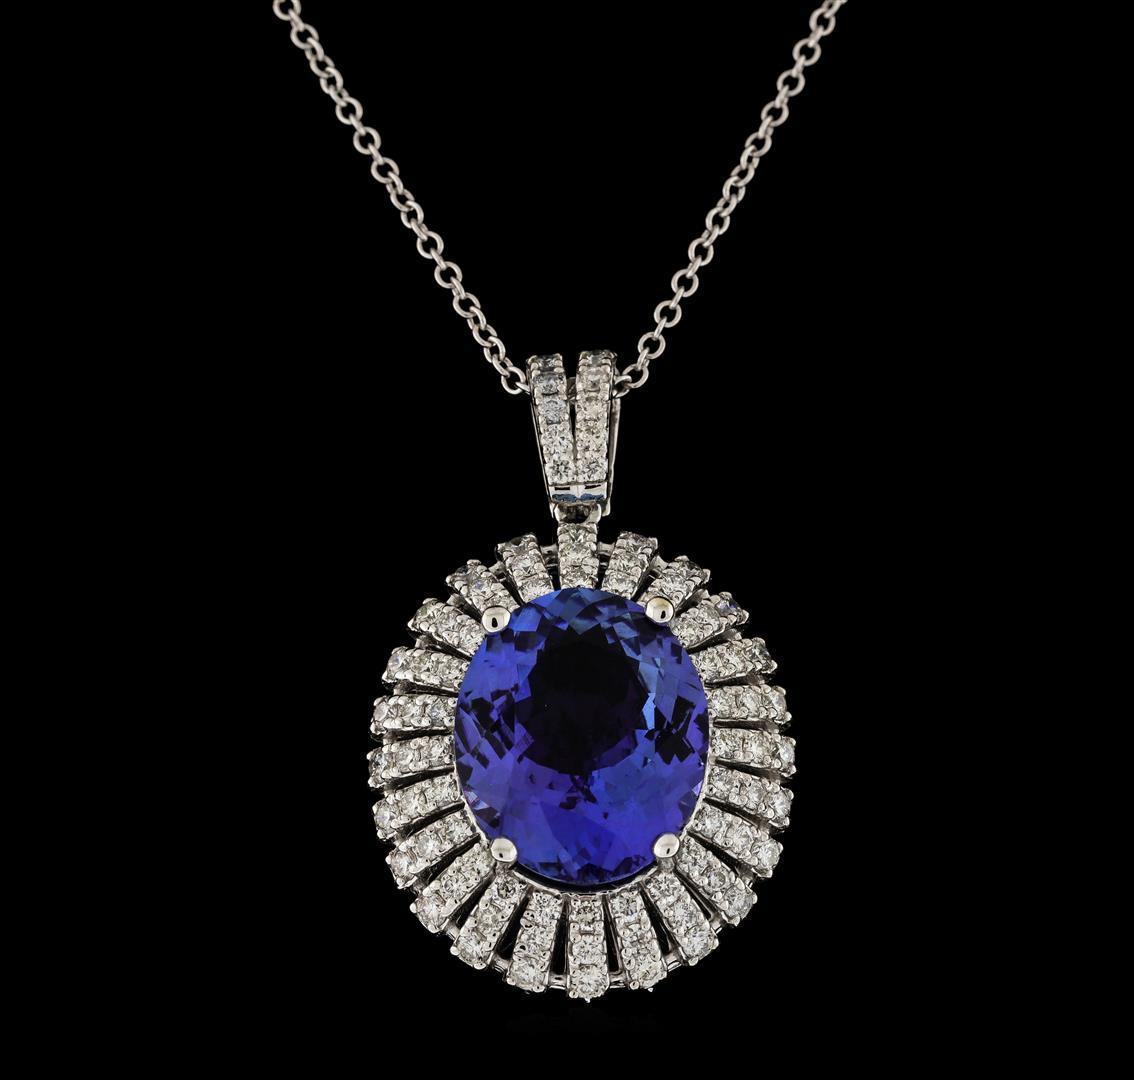 6.81 ctw Tanzanite and Diamond Pendant With Chain - 14KT White Gold